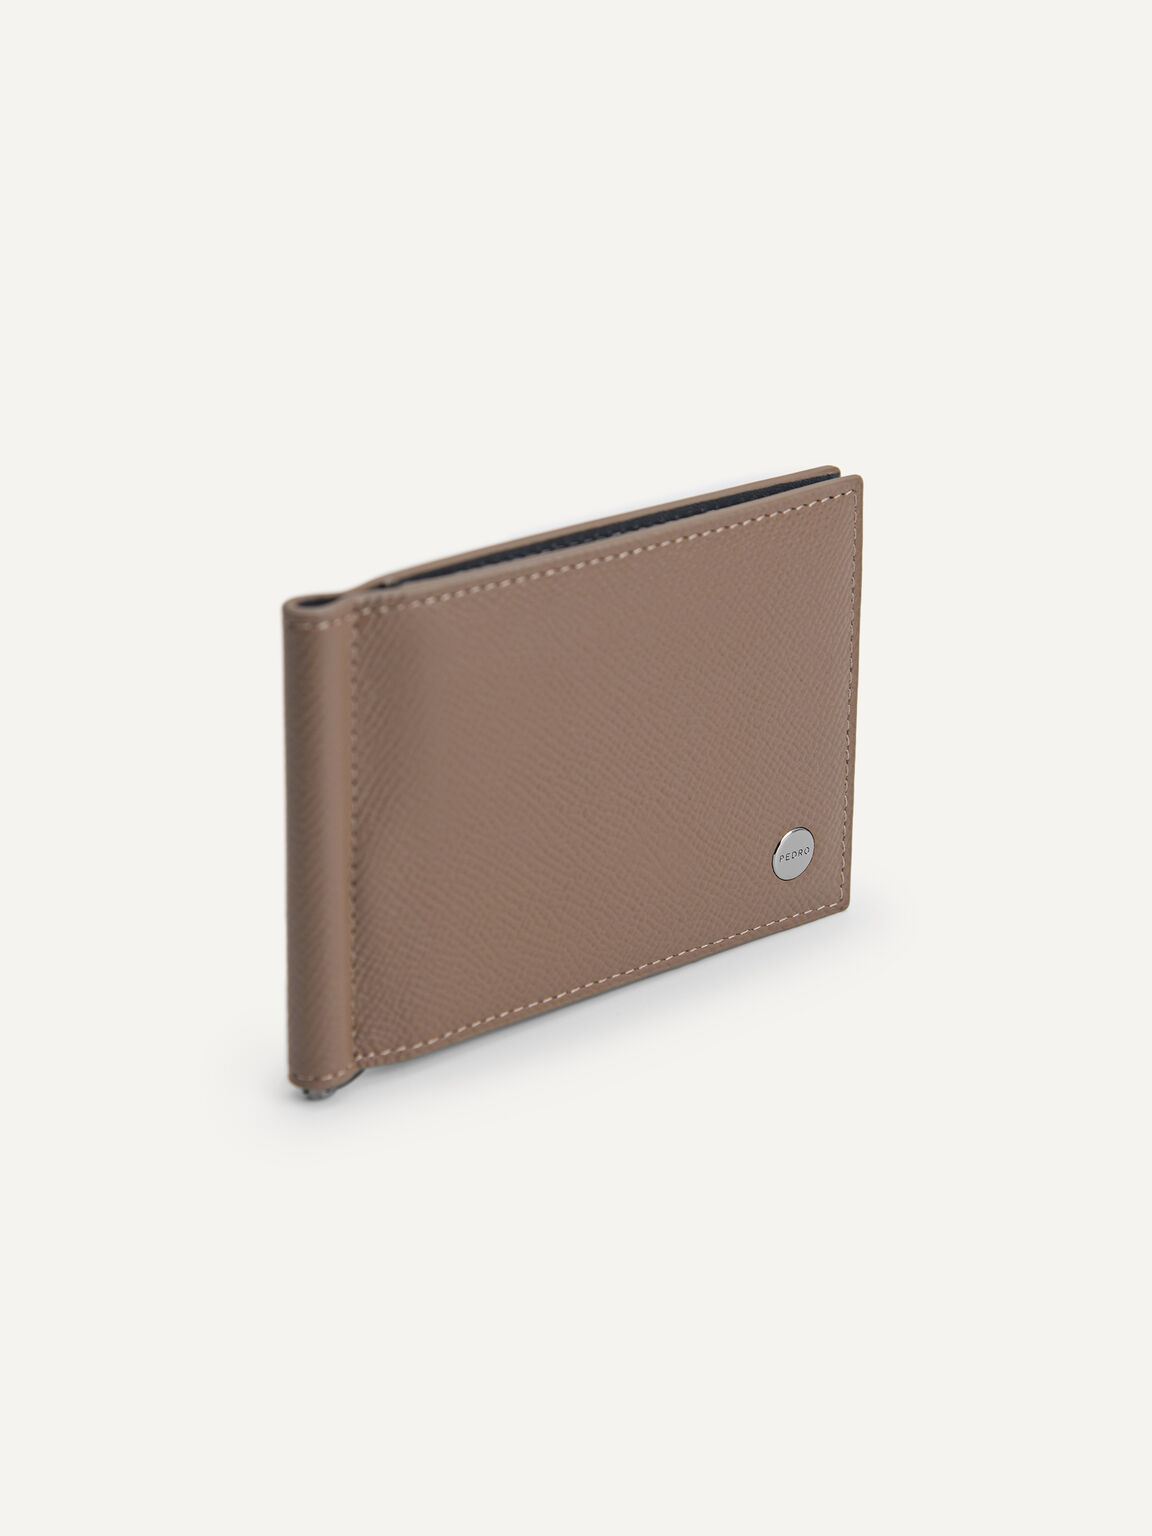 Textured Leather Bi-Fold Wallet, Taupe